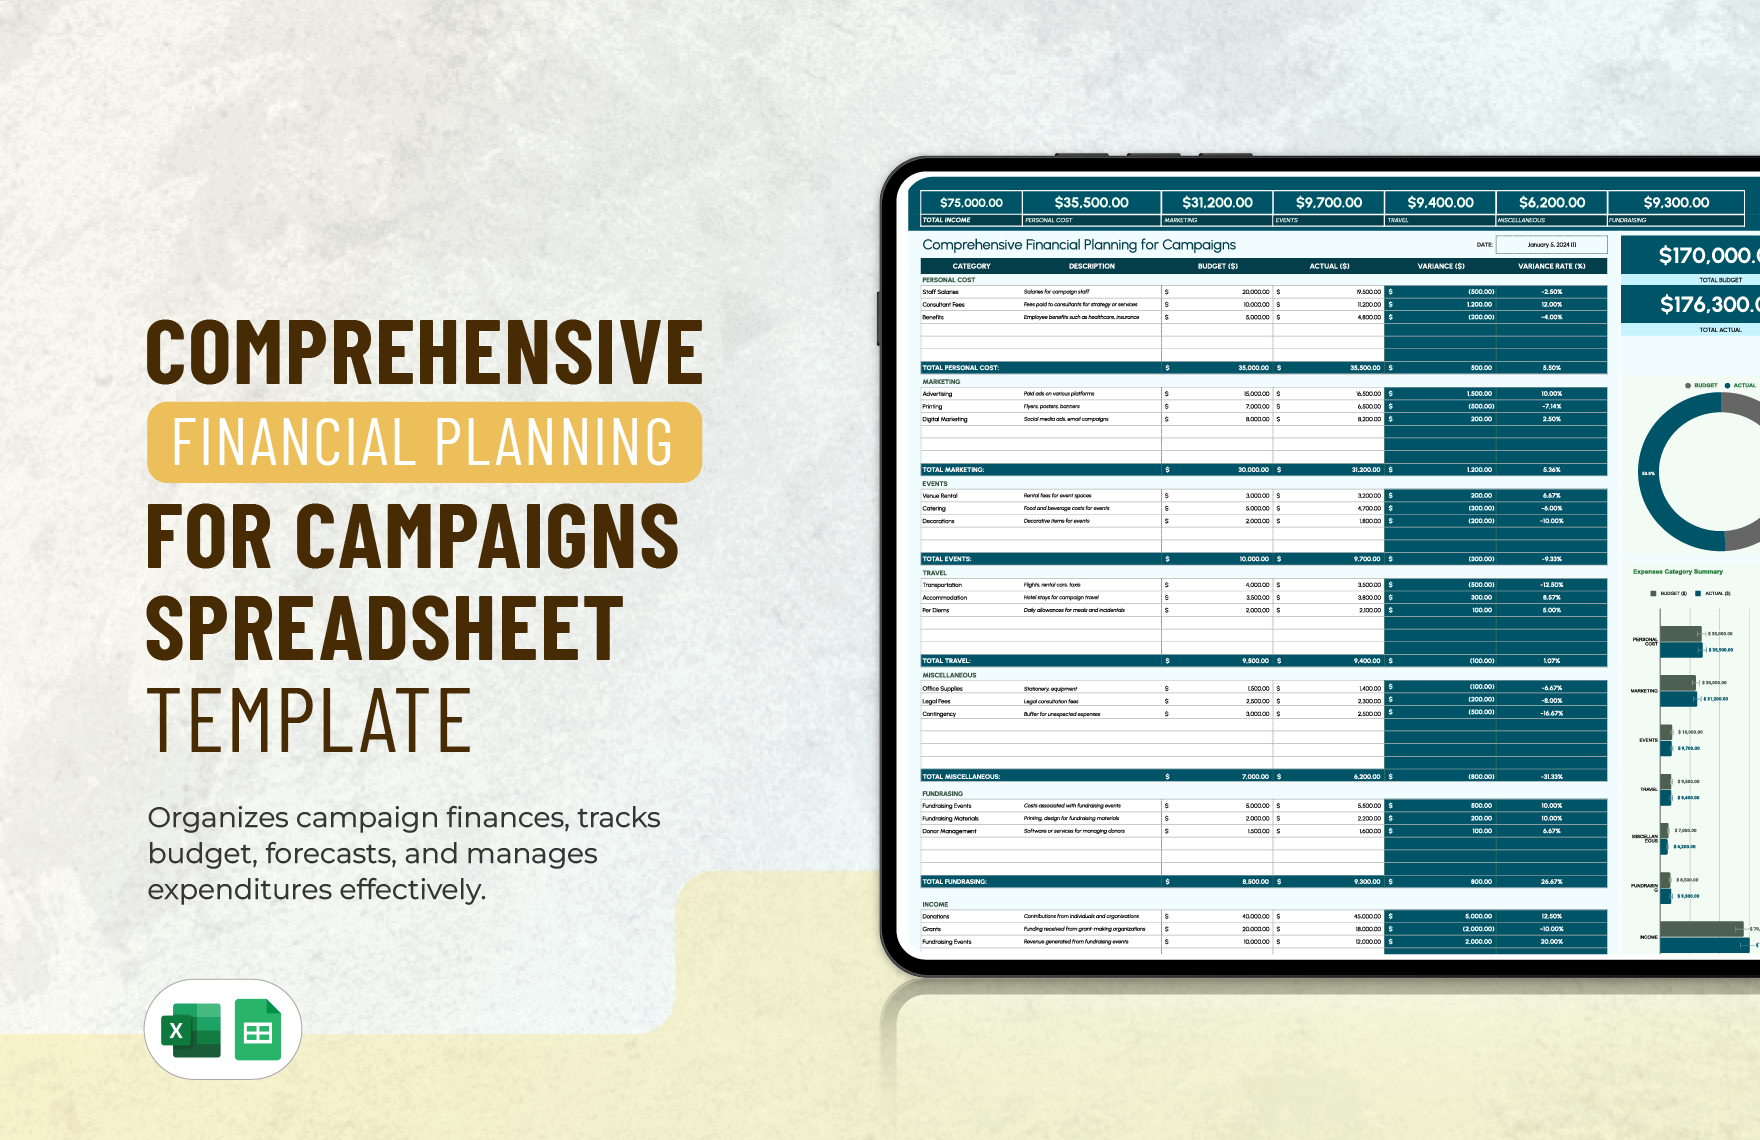 Comprehensive Financial Planning for Campaigns Spreadsheet Template in Excel, Google Sheets